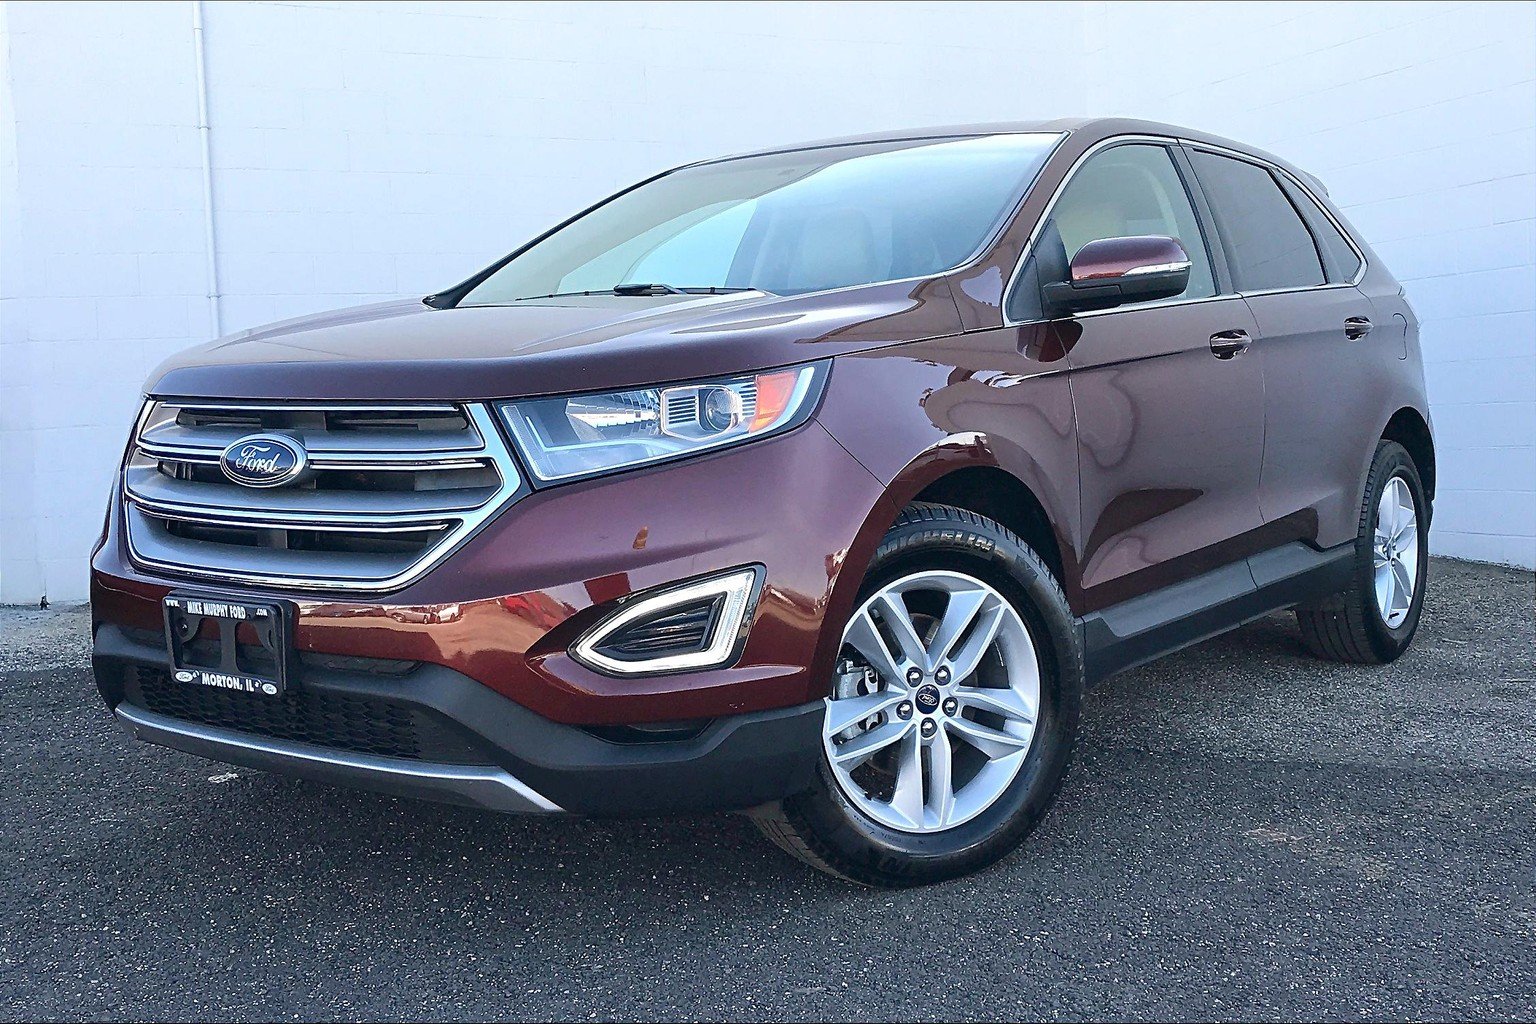 Pre-Owned 2015 Ford Edge 4dr SEL FWD 4D Sport Utility in Morton #